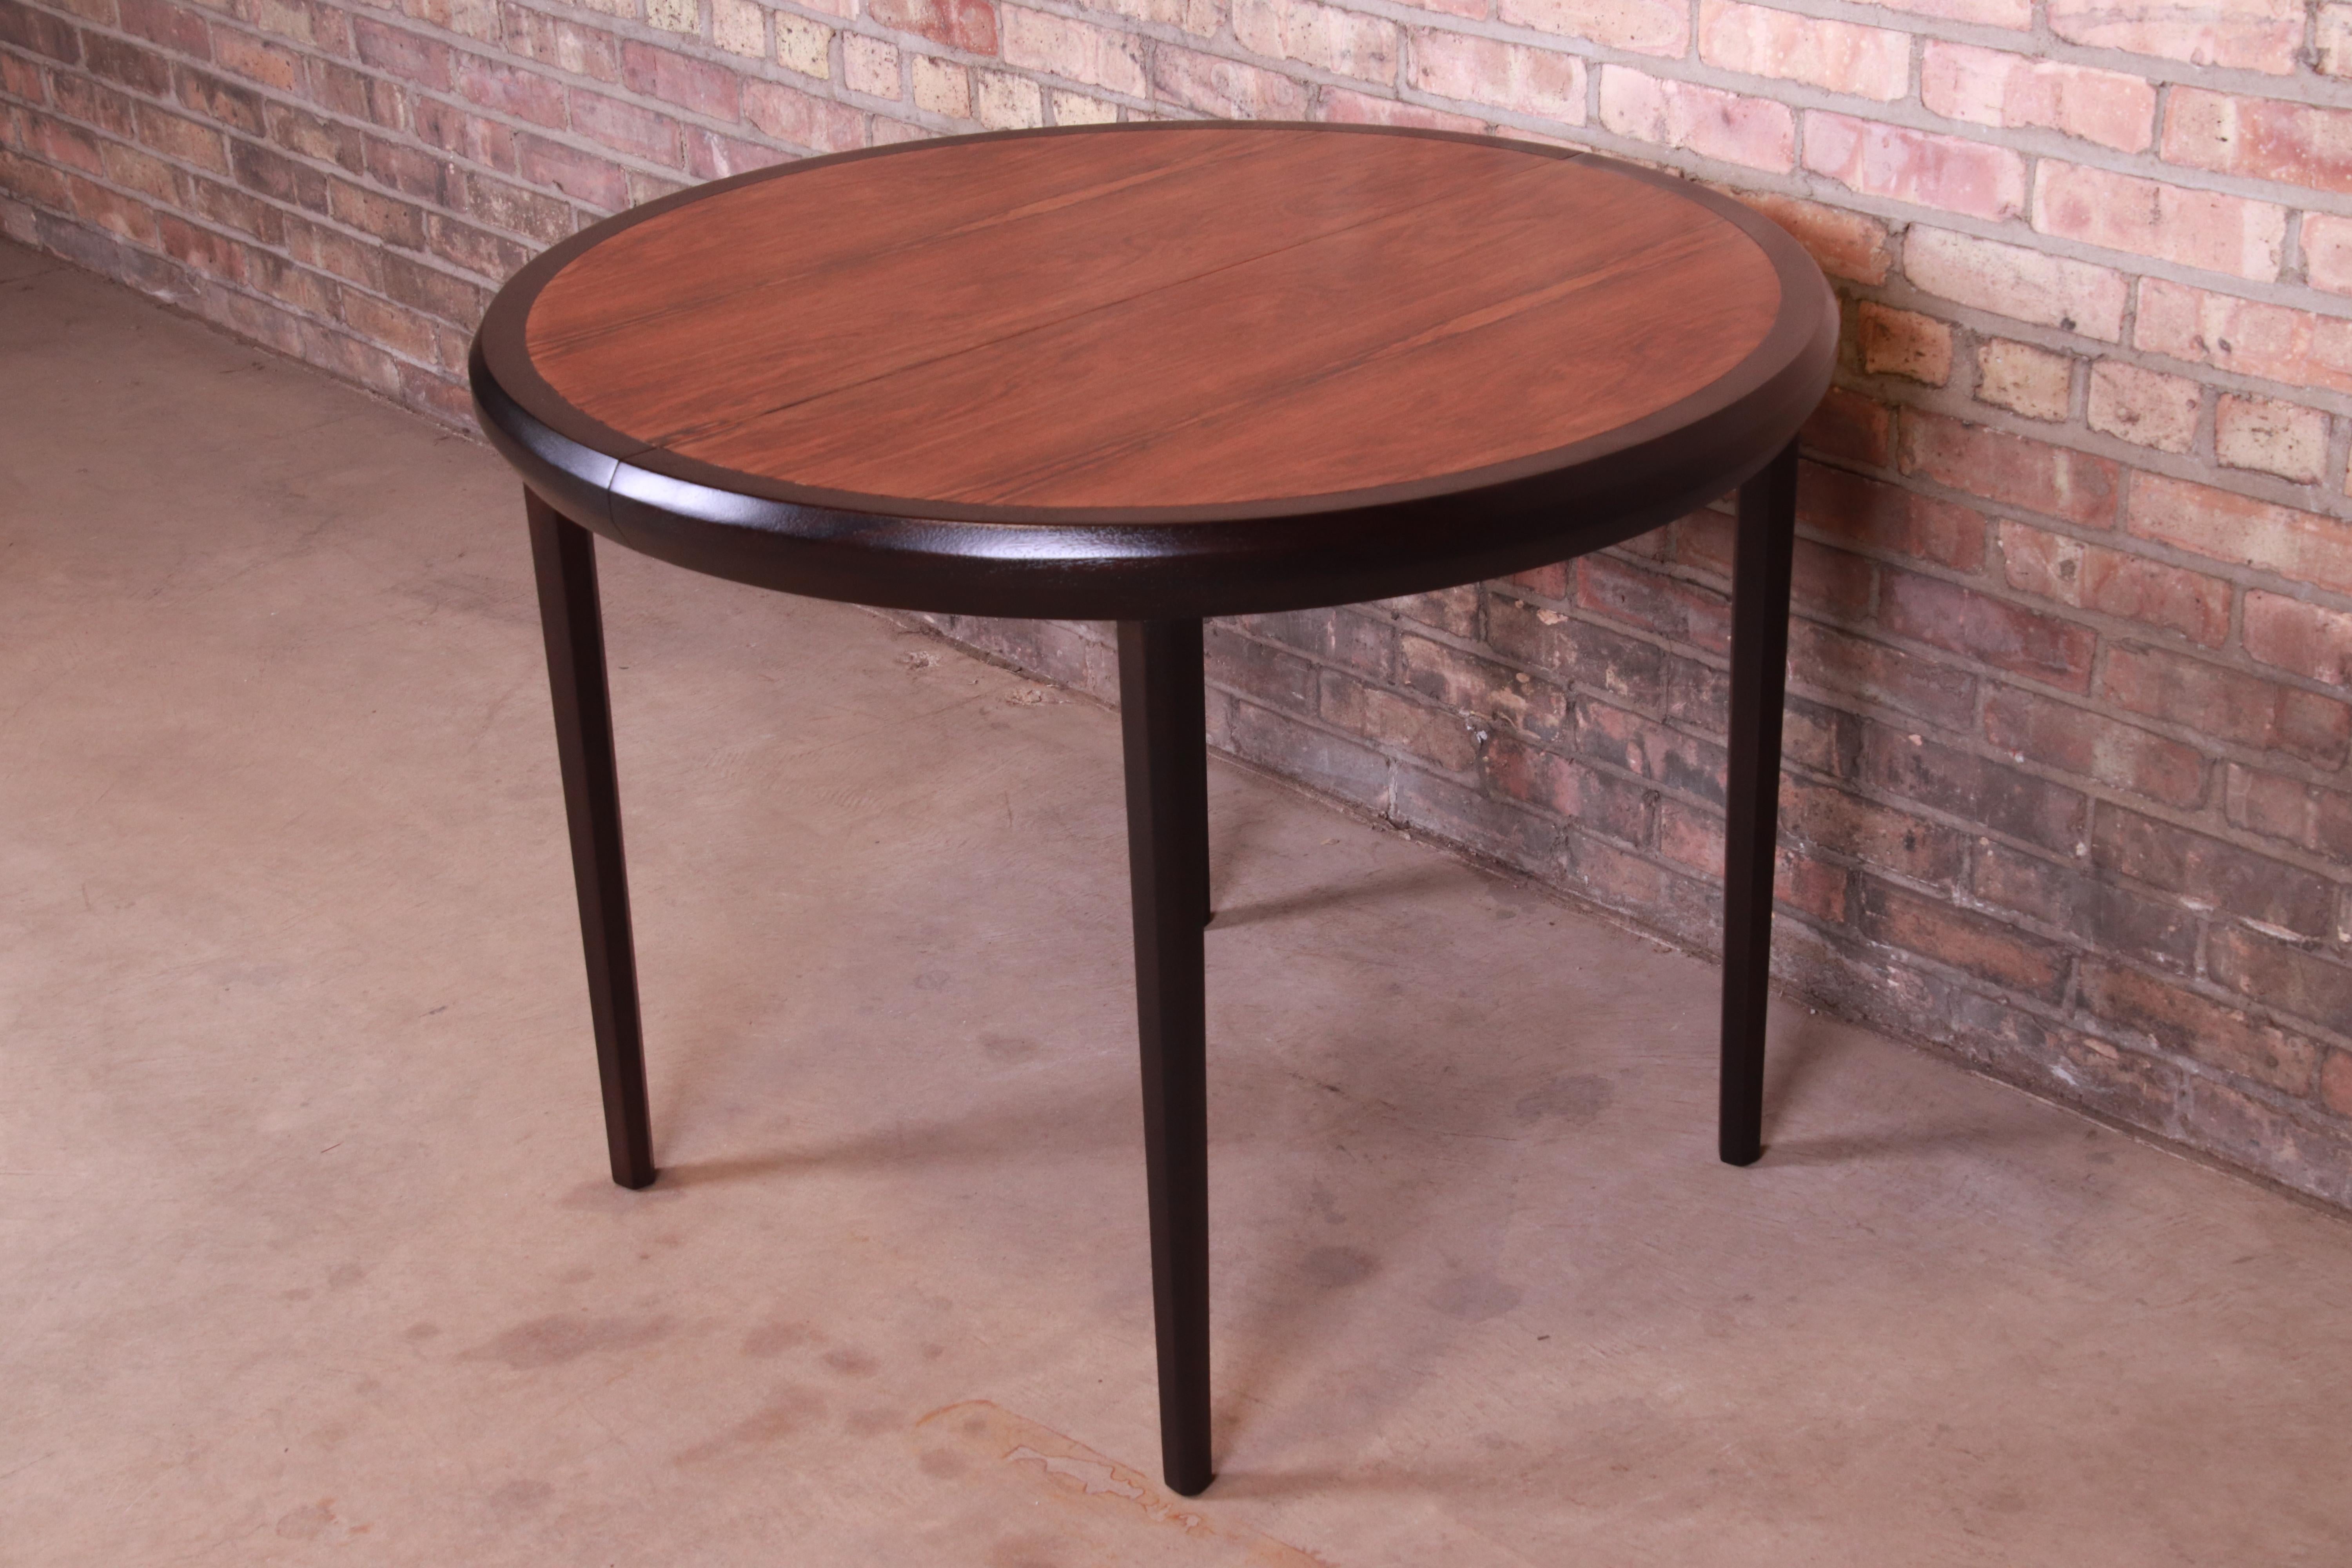 Mid-20th Century Harvey Probber Rosewood and Ebonized Walnut Extension Dining Table, Refinished